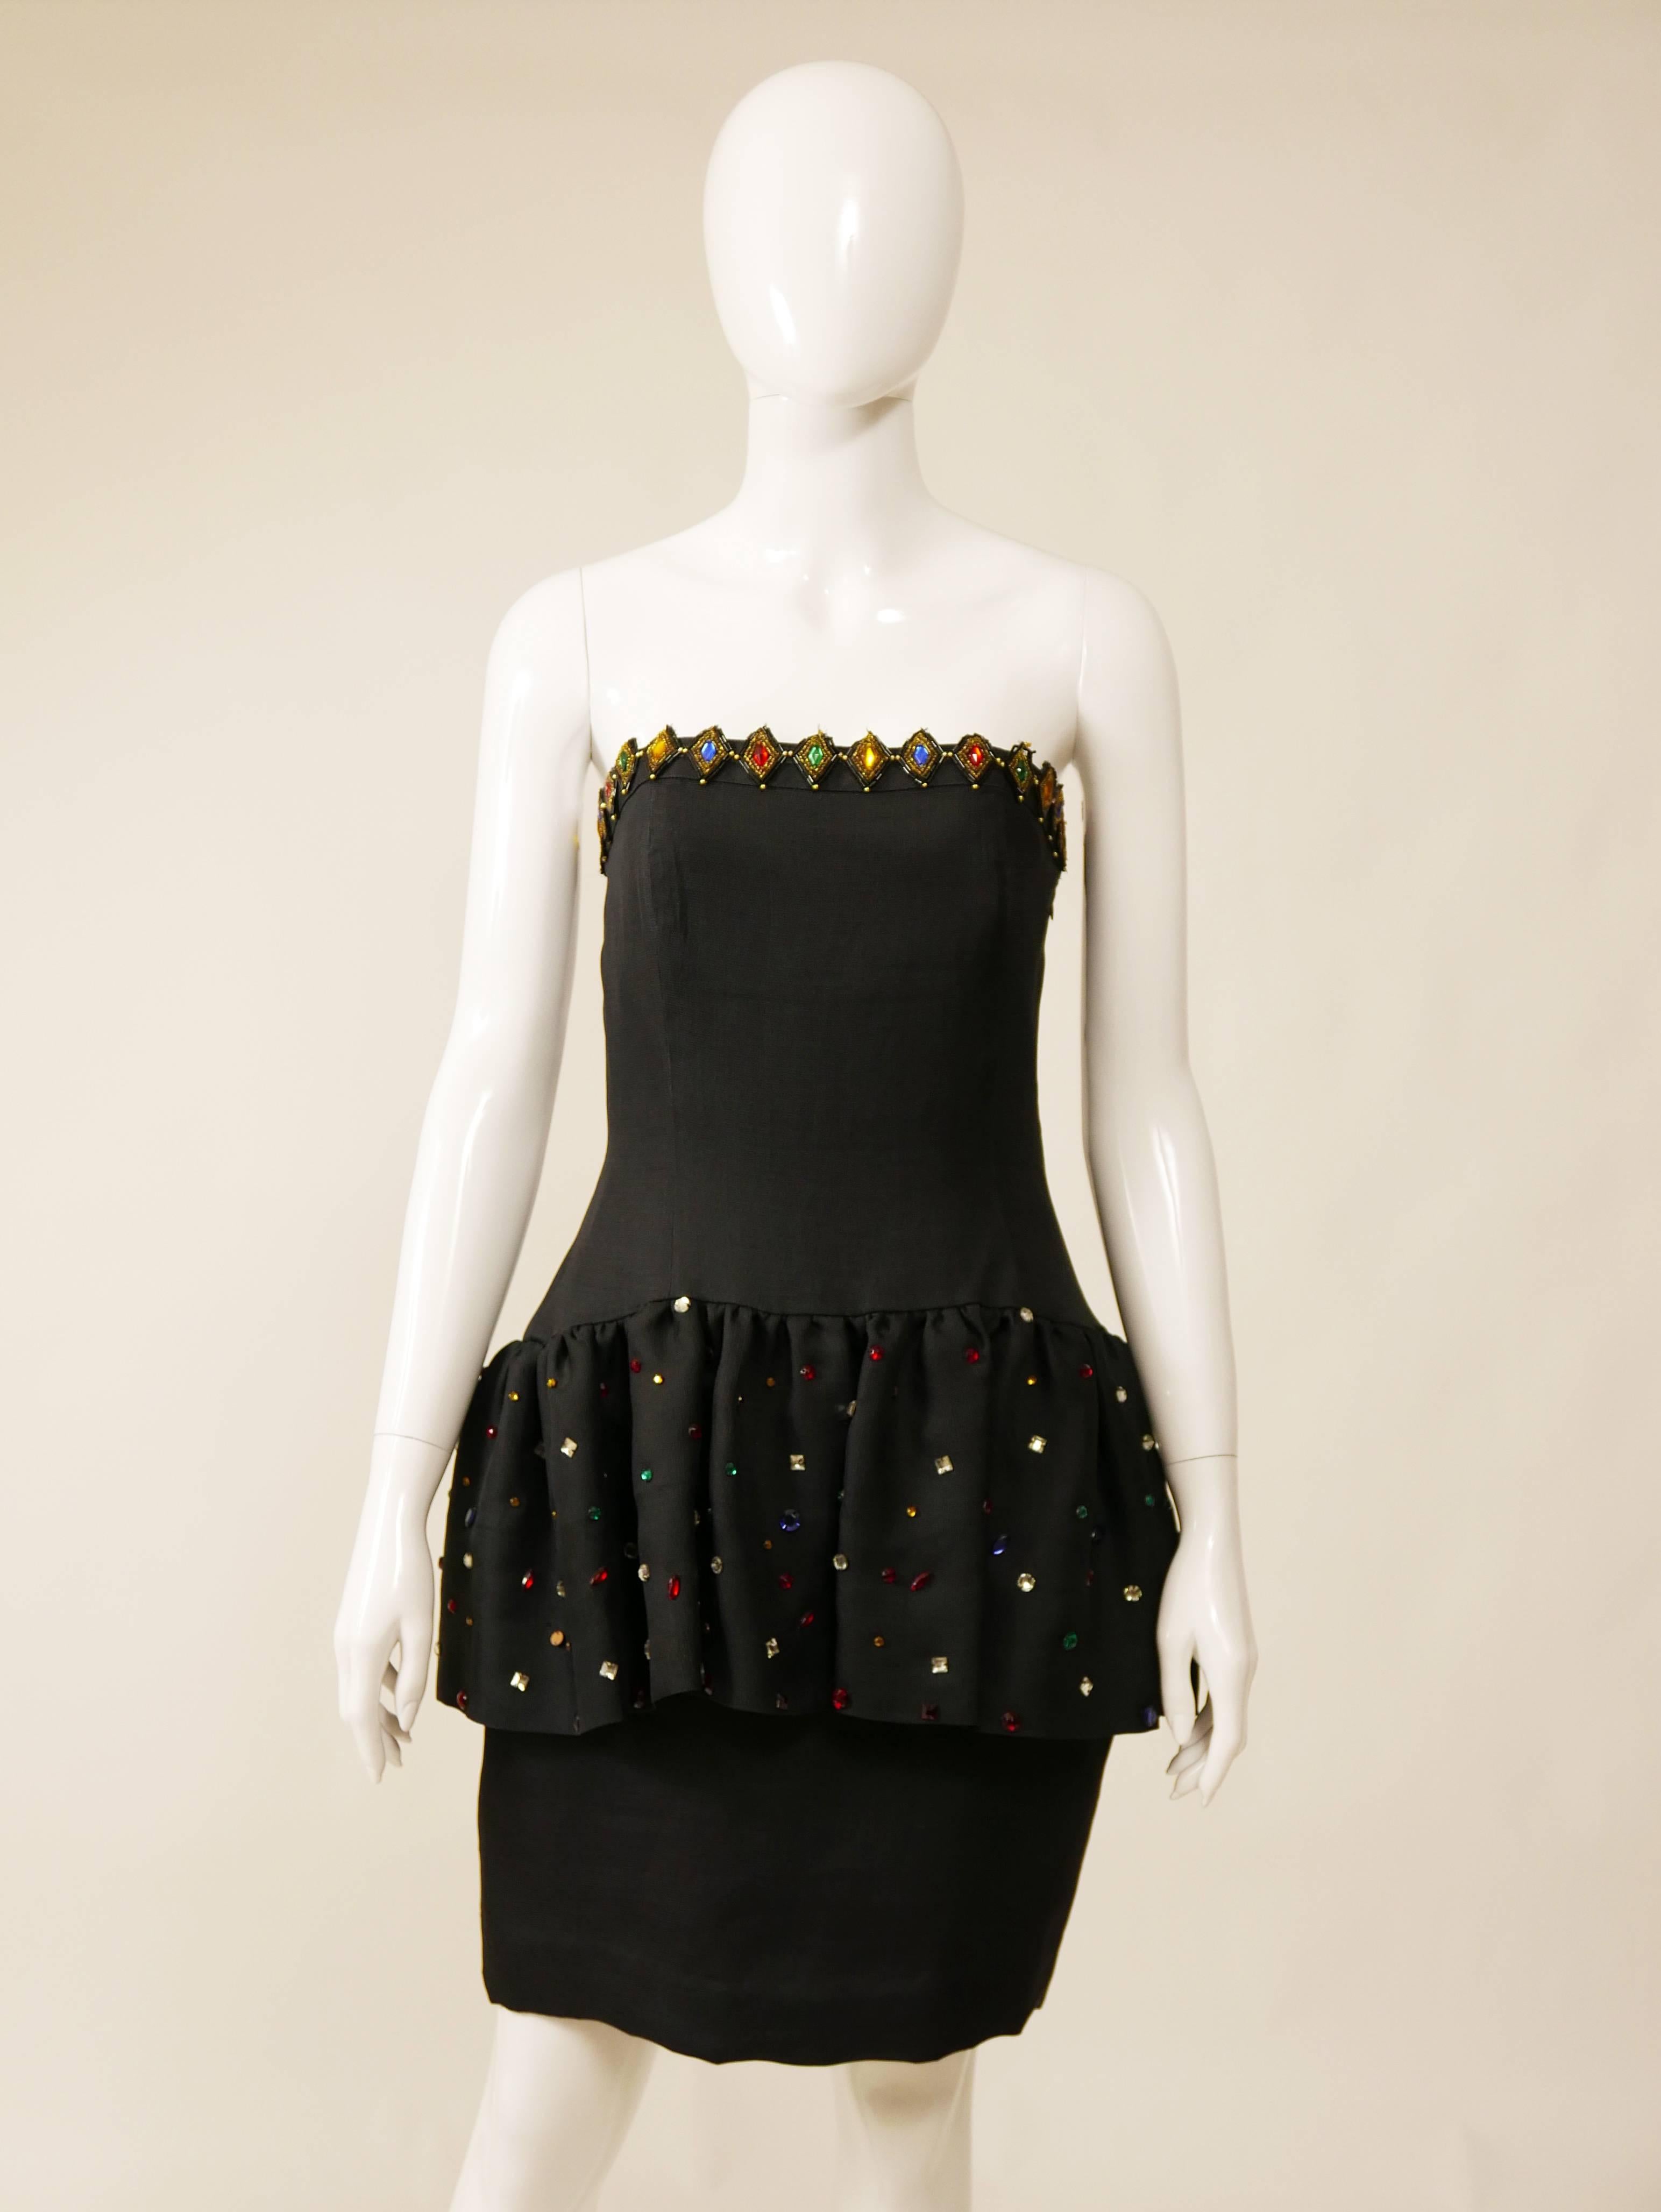 This amazing Saint Laurent 1980s cocktail dress is in a black silk fabric with beadeds and rhinestones details. The strapless top is straight across and has ruffled skirt over pencil skirt and is satin lined. 

Very Good vintage